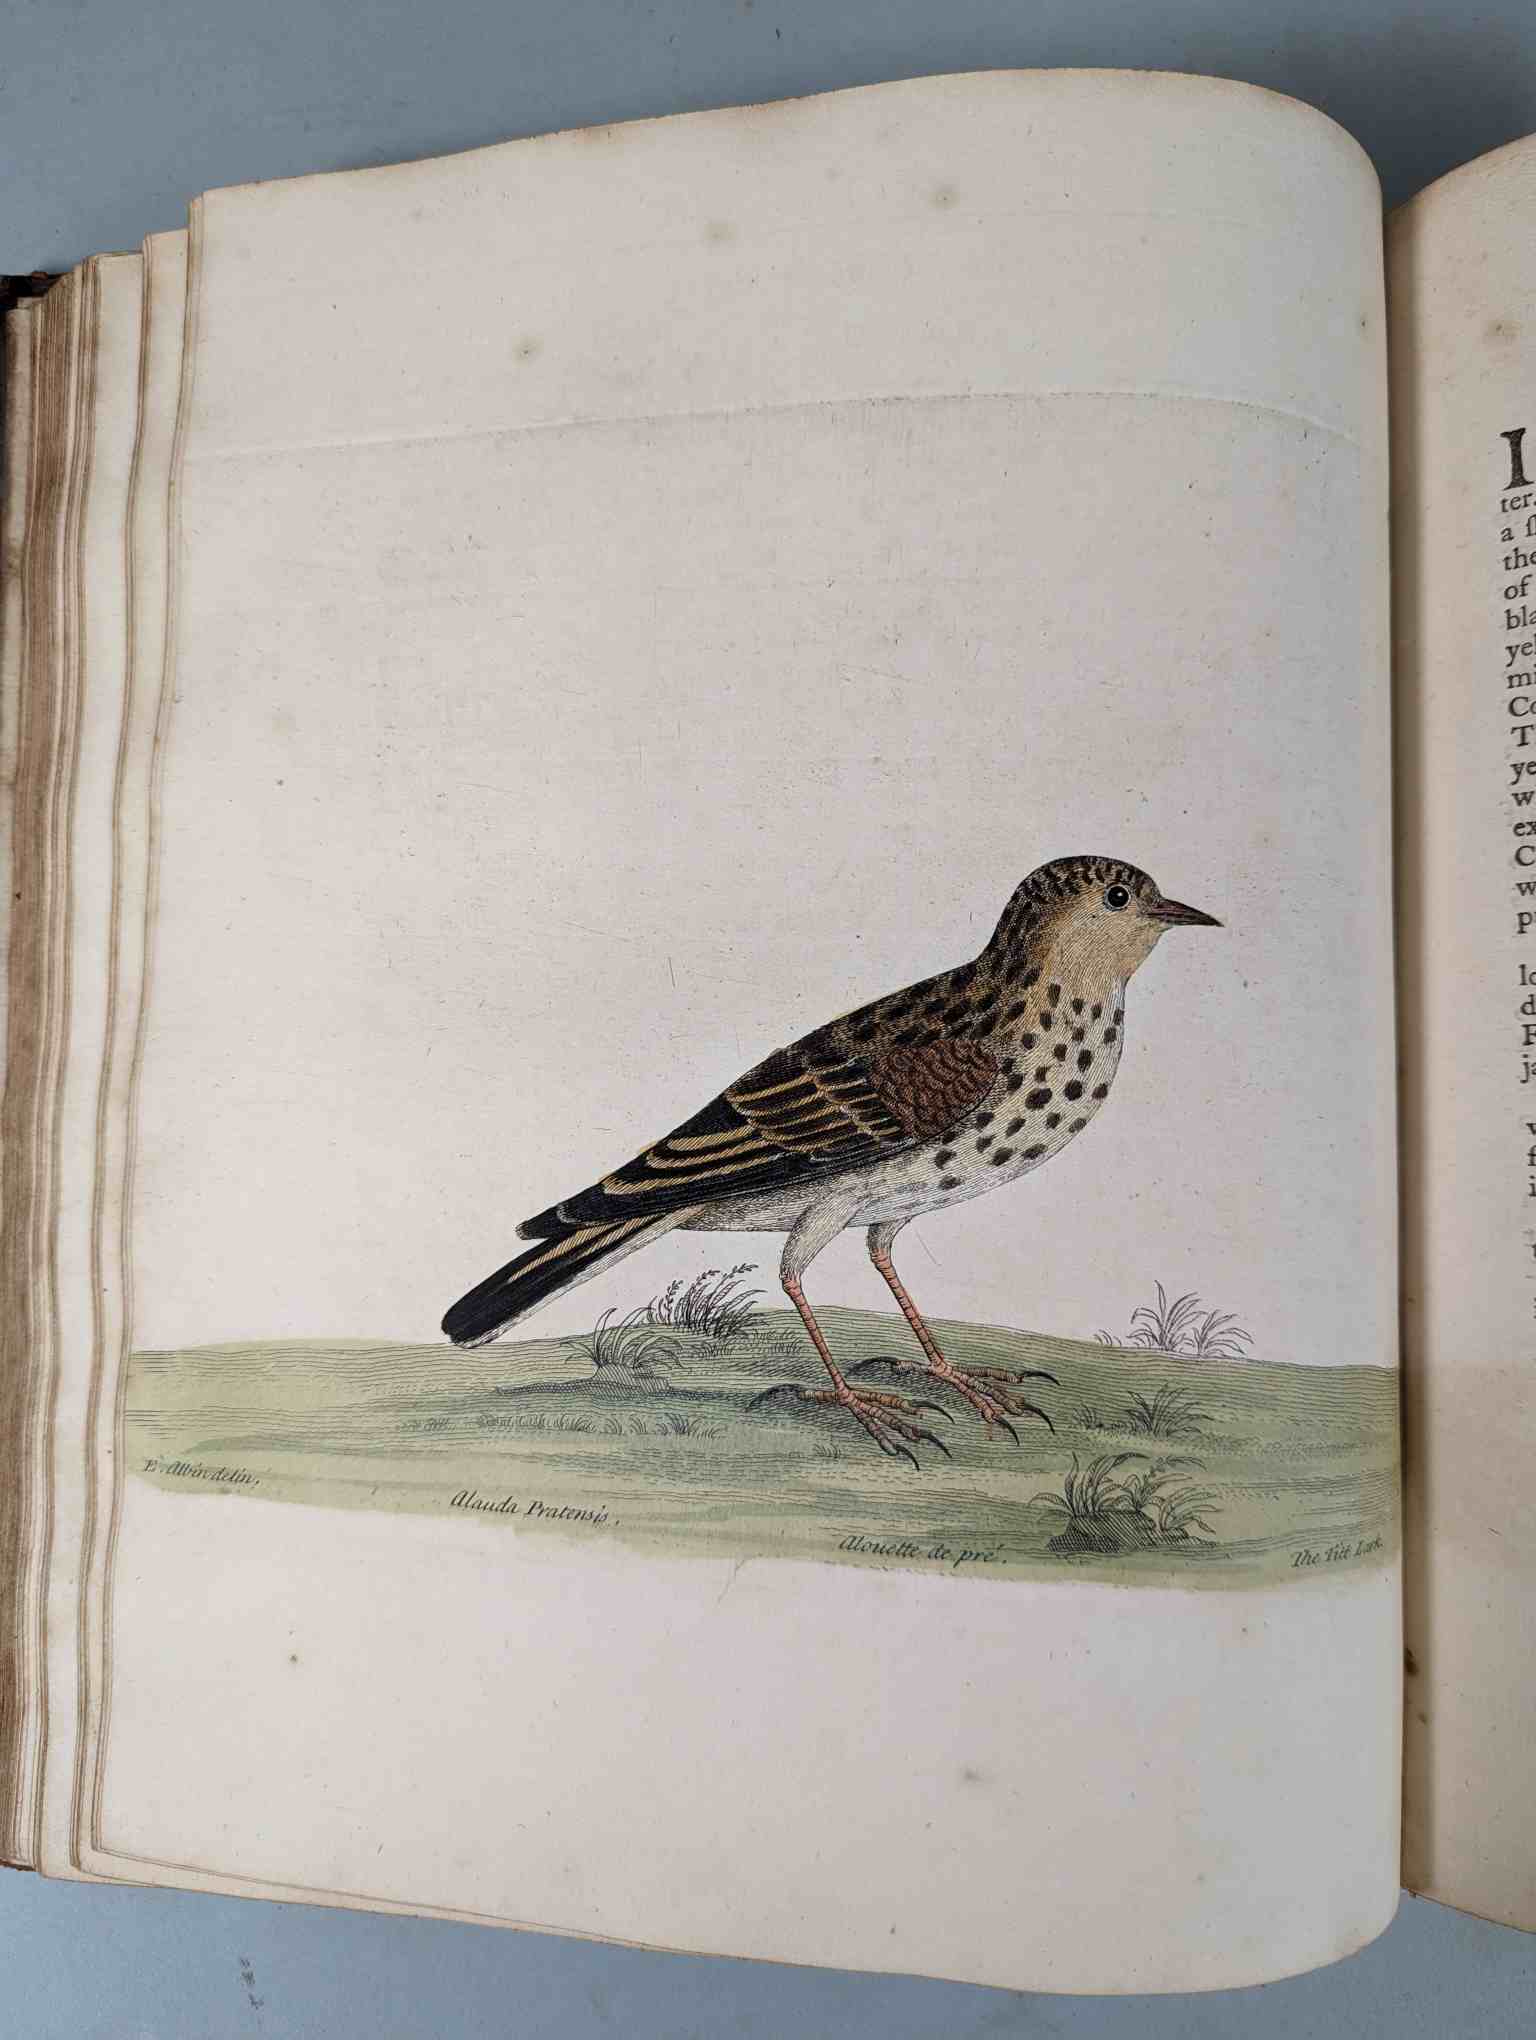 ALBIN, Eleazar. A Natural History of Birds, to which are added, Notes and Observations by W. - Image 46 of 208